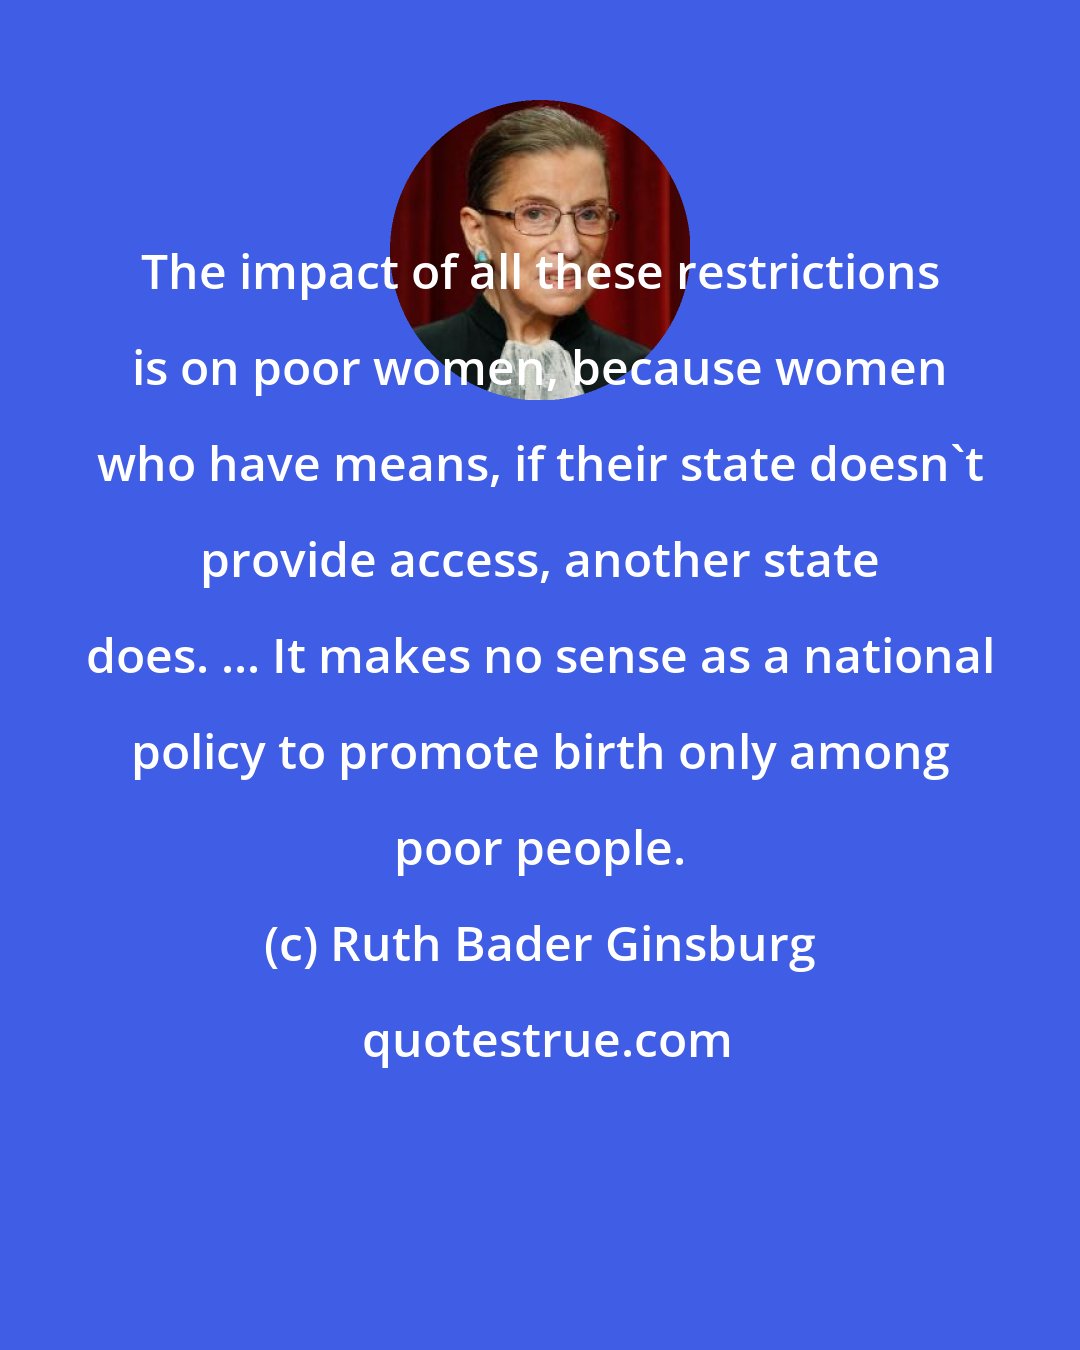 Ruth Bader Ginsburg: The impact of all these restrictions is on poor women, because women who have means, if their state doesn't provide access, another state does. ... It makes no sense as a national policy to promote birth only among poor people.